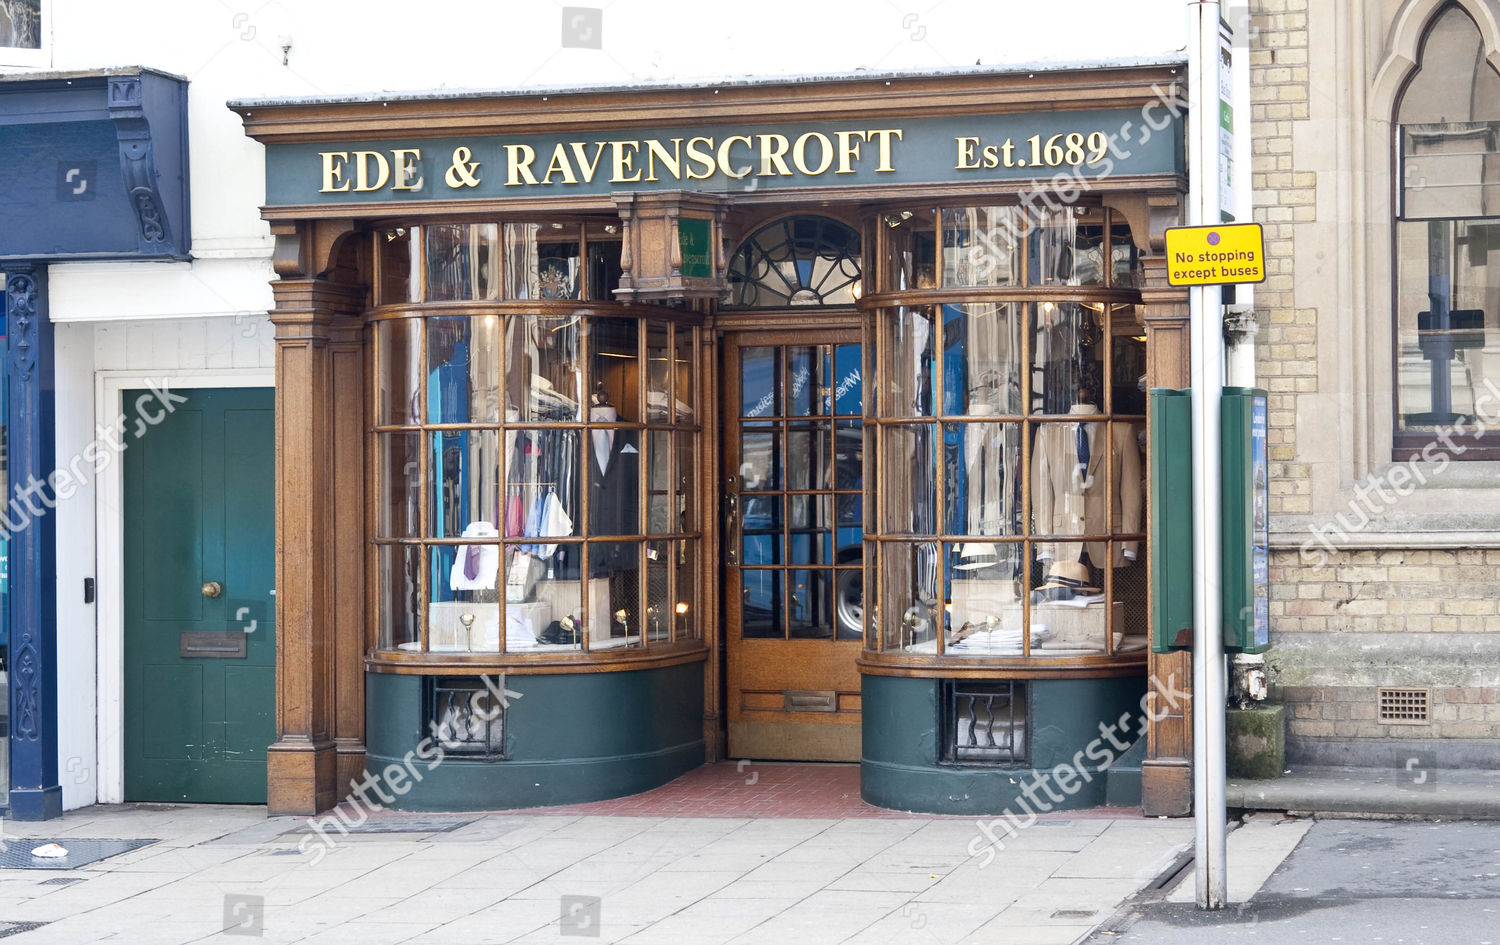 Ede Ravenscroft Tailor Shop Oxford Which Showing Editorial Stock Photo Stock Image Shutterstock